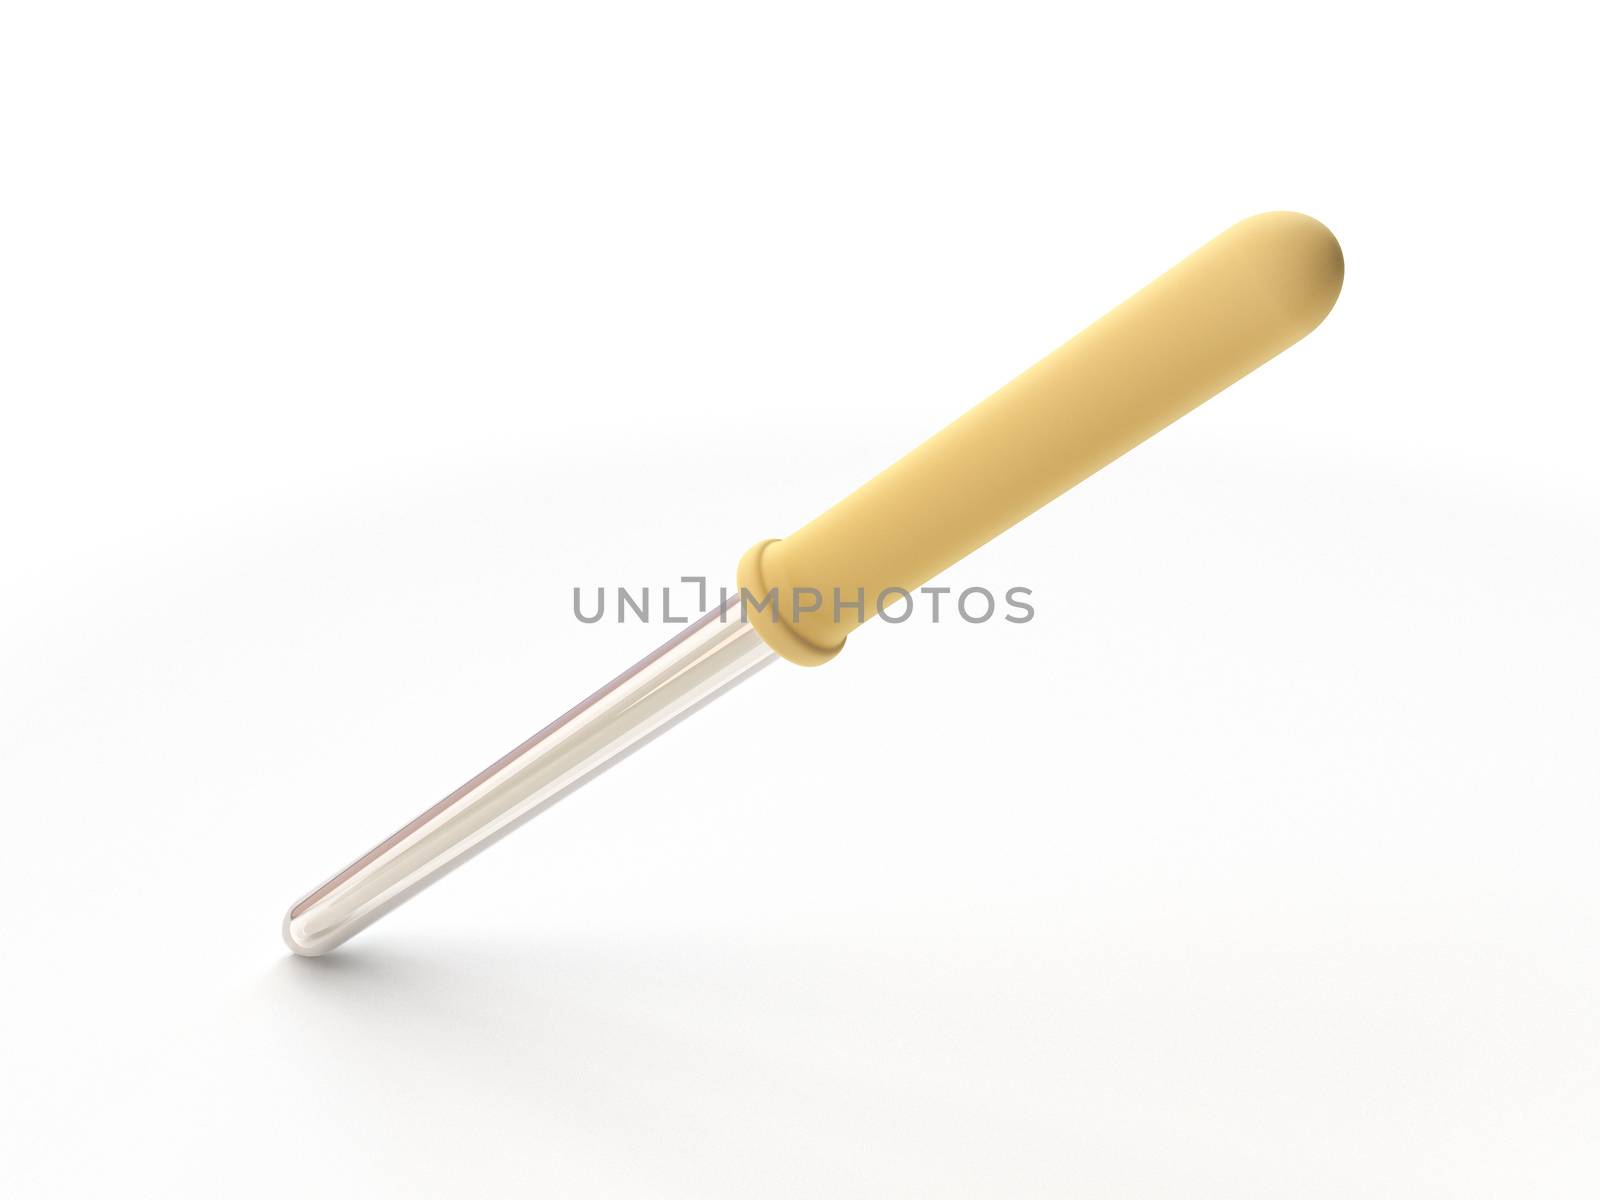 dropper isolated on white background. classic pippete. medical tool for instillation.